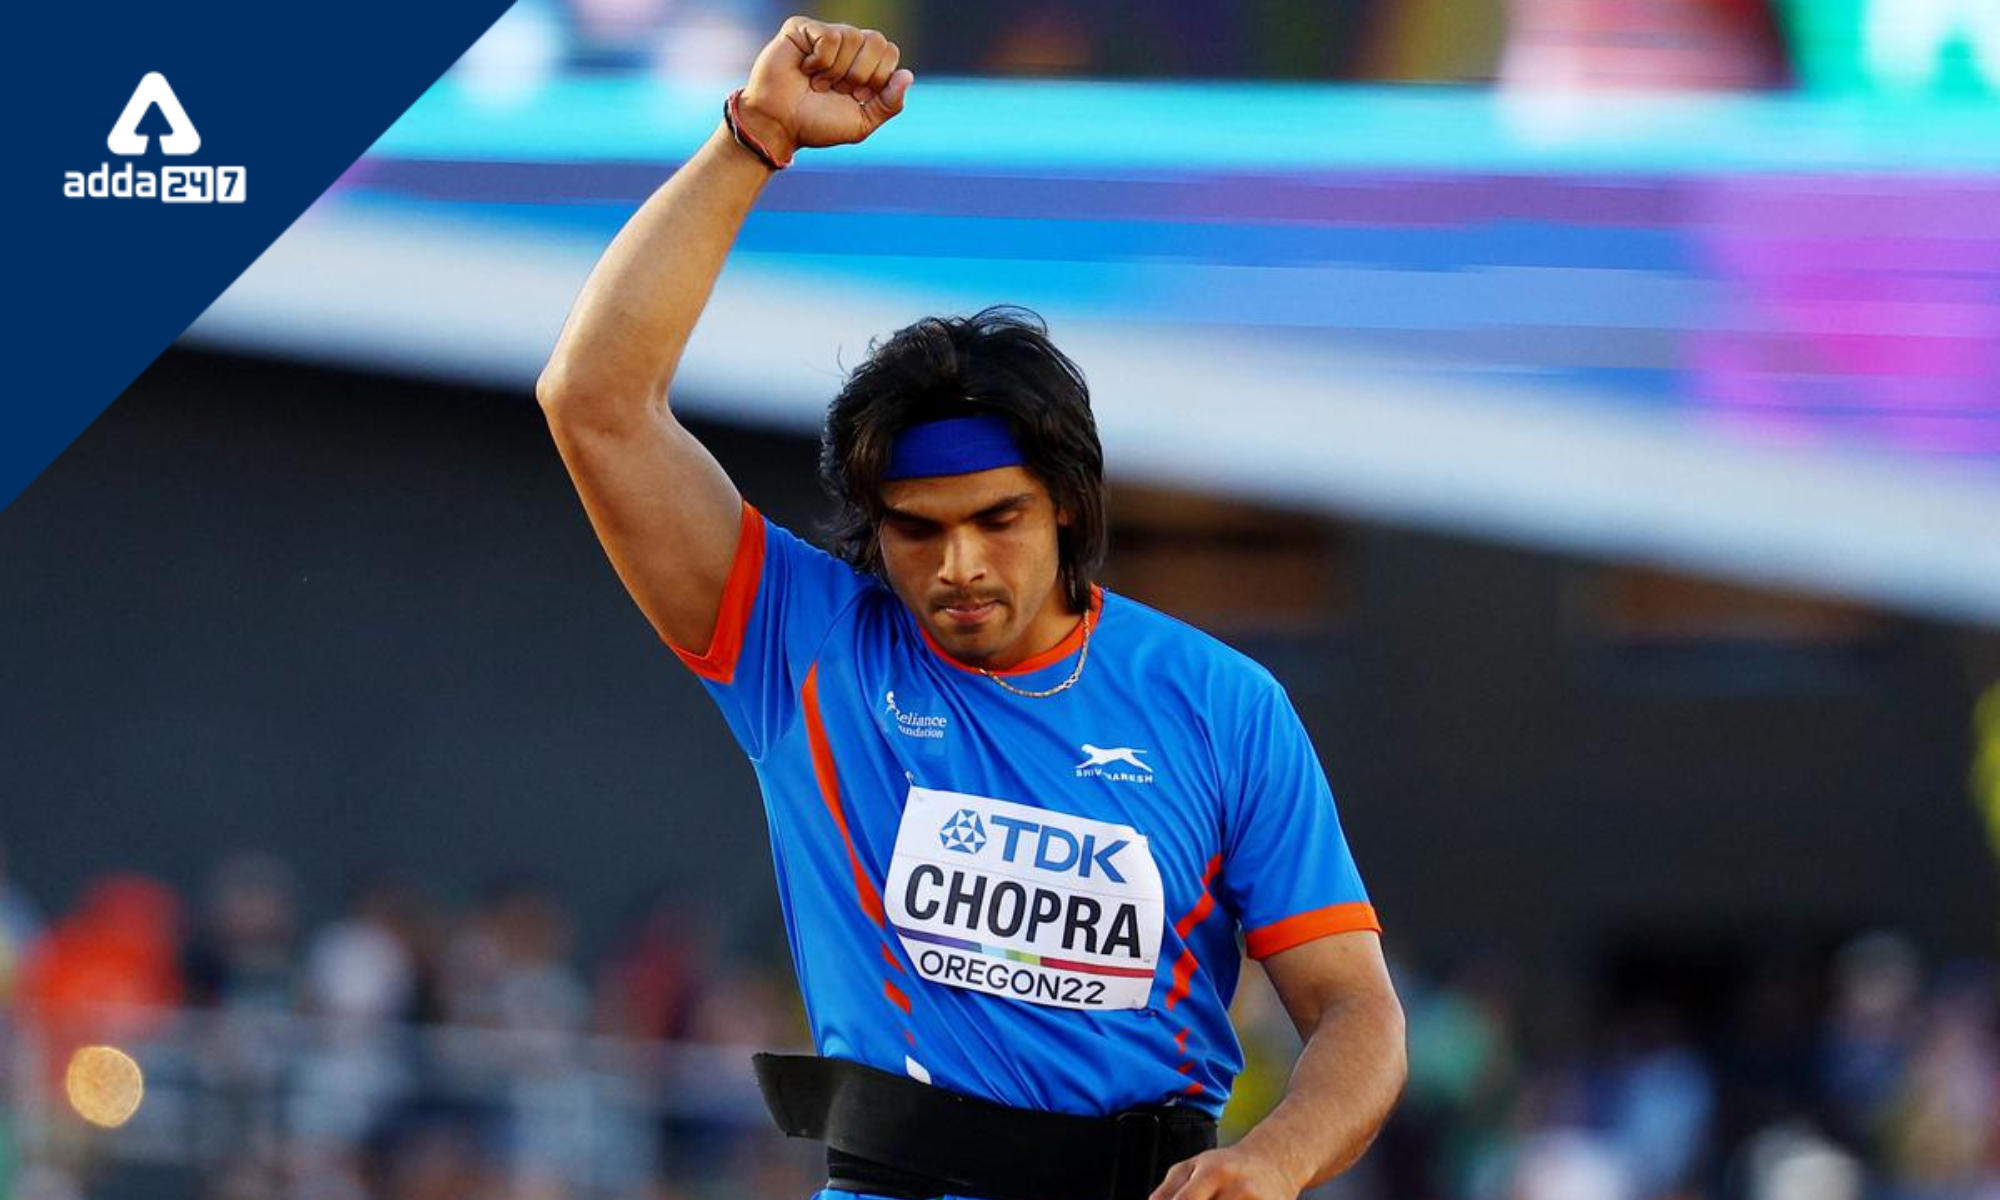 Neeraj Chopra wins a silver medal in the javelin at the world championships